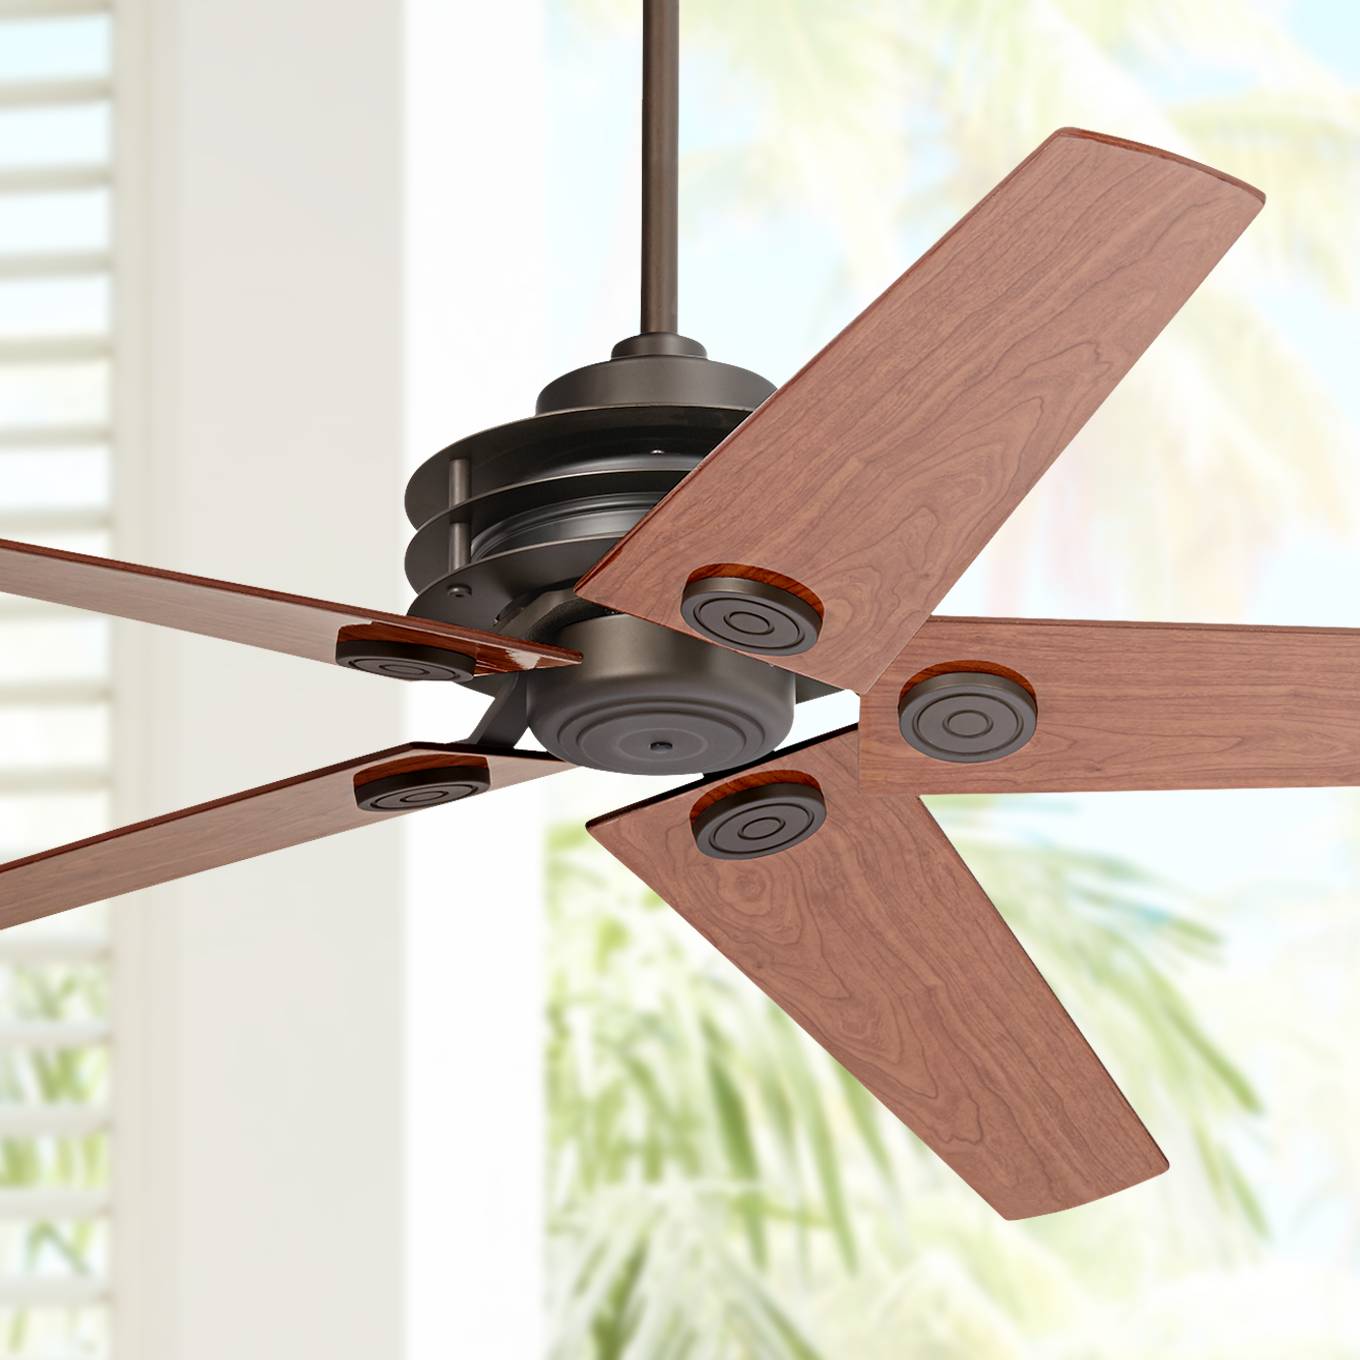 Details About 60 Mission Ceiling Fan With Remote Oil Rubbed Bronze Damp Rated For Living Room